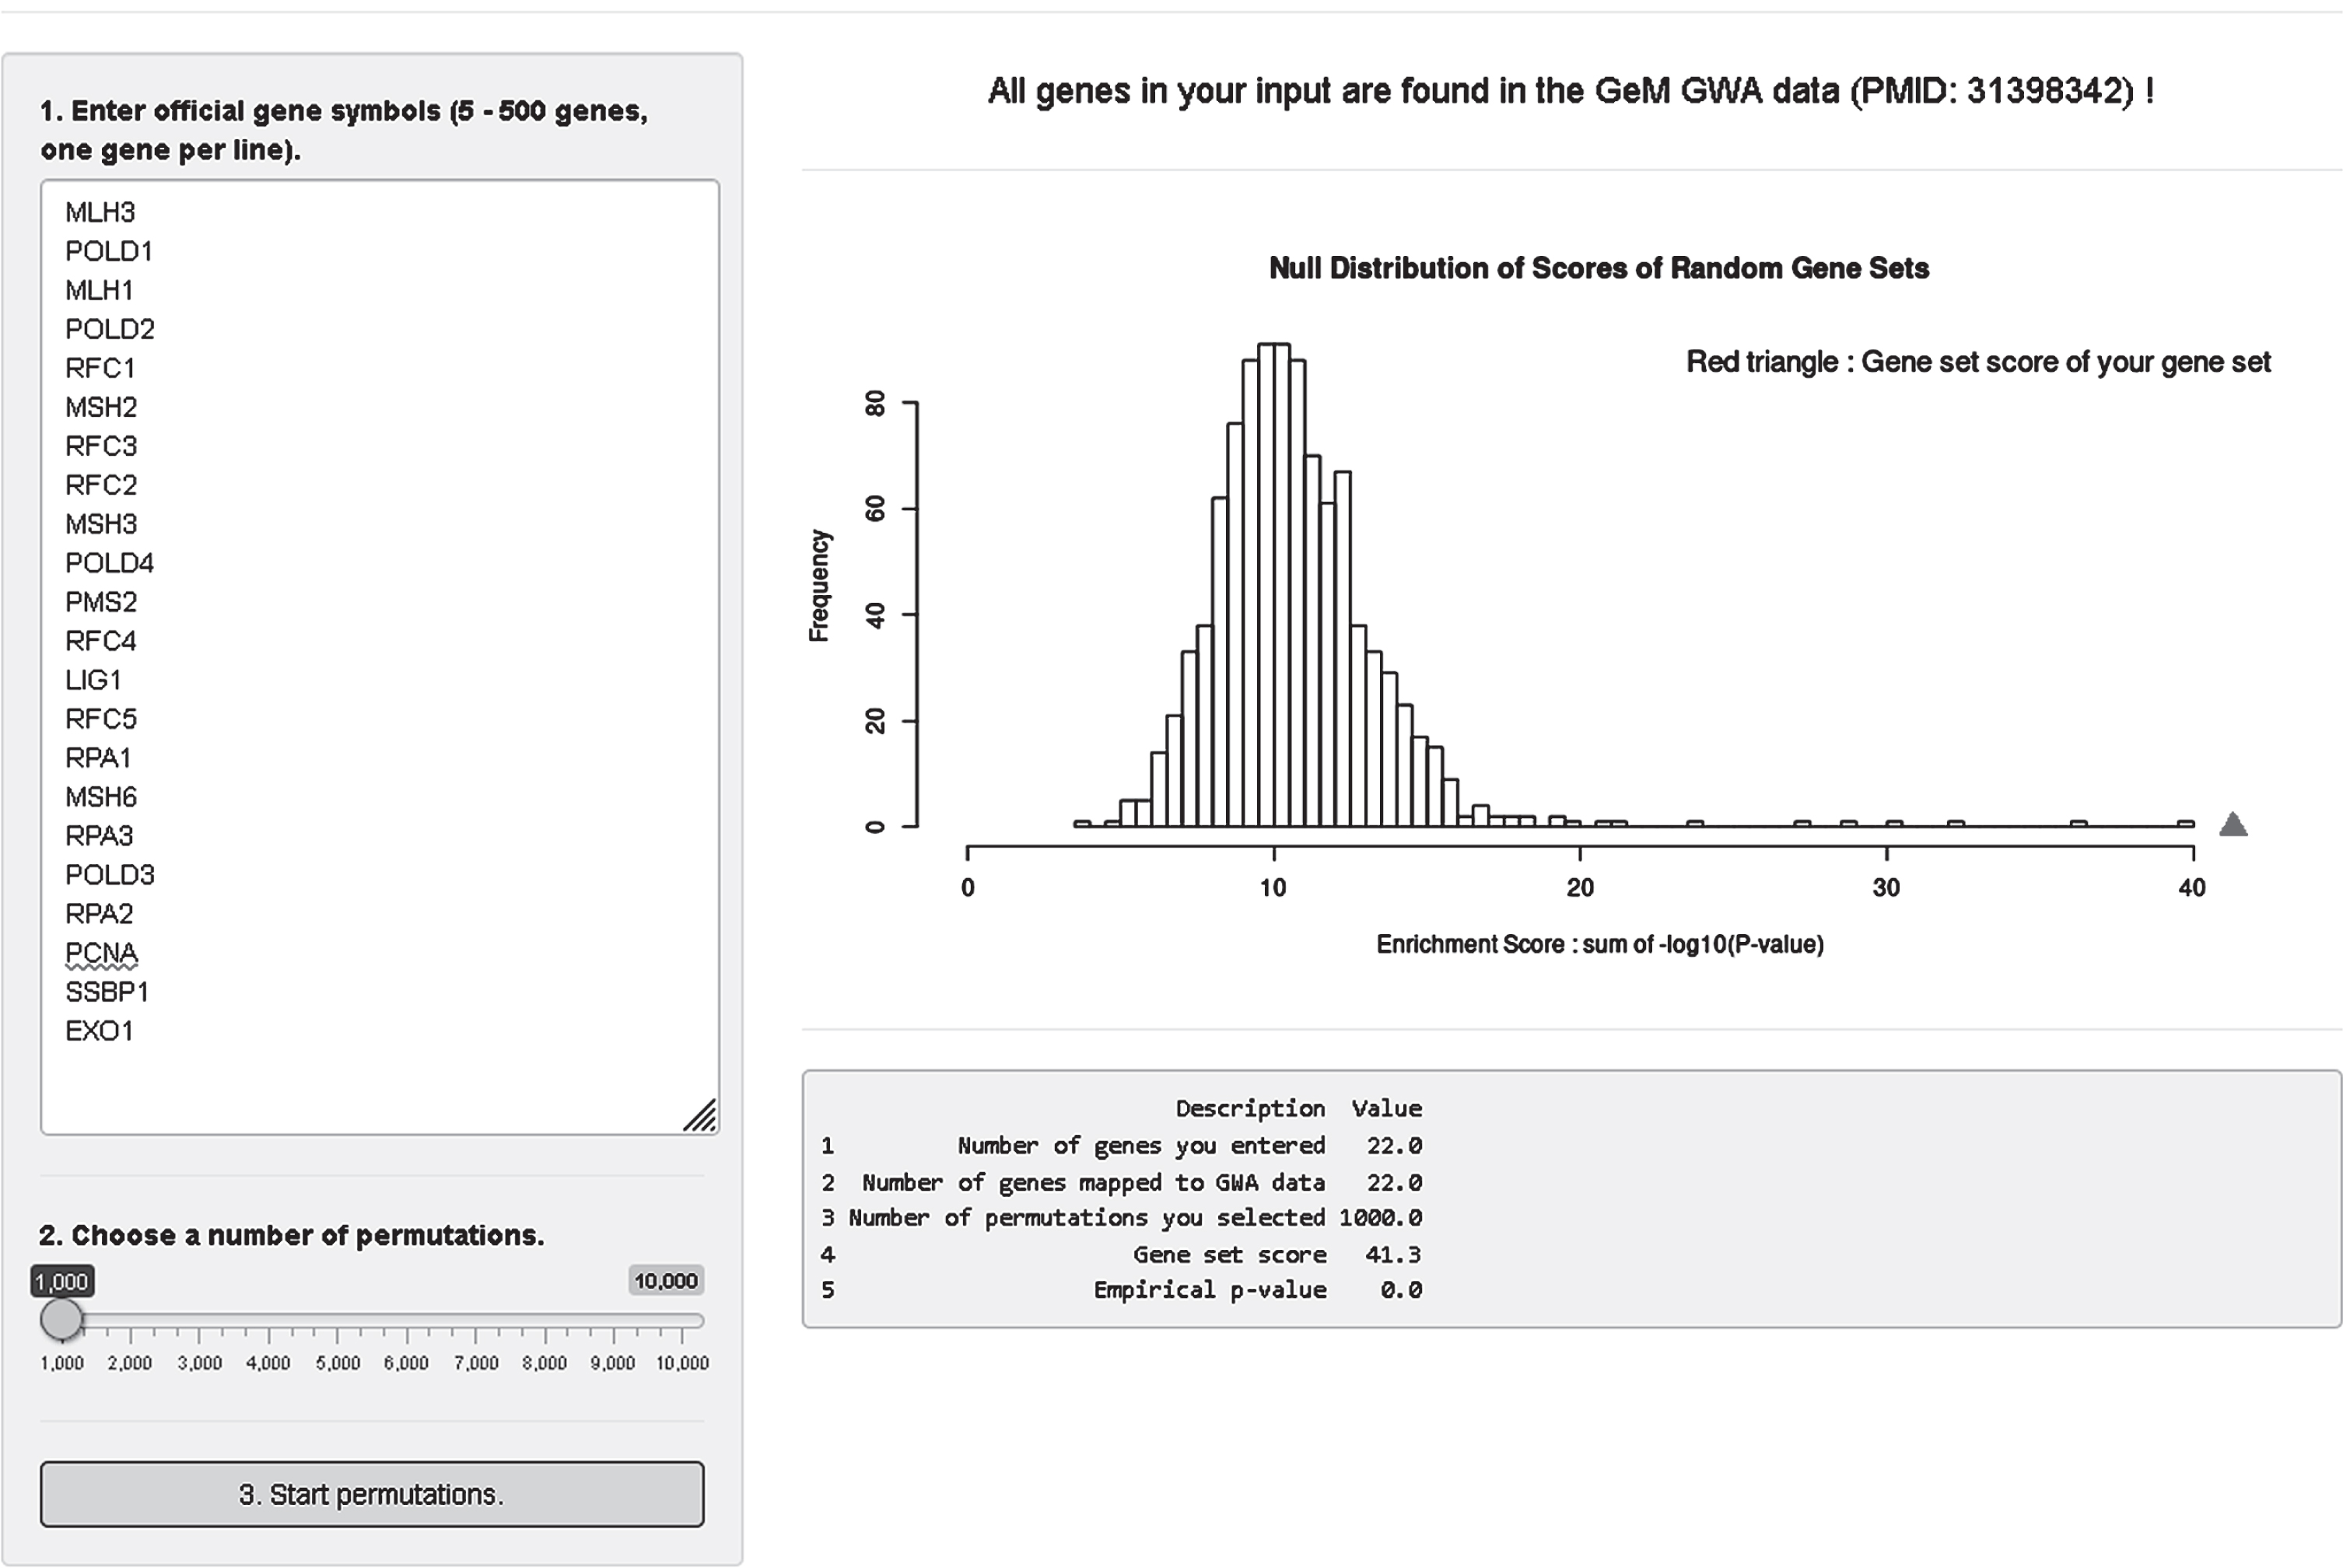 GeM-HD Euro 9K performs Gene Set Enrichment Analysis (GSEA) for user-provided gene sets. GSEA analysis of the GWA association data can be performed for any custom gene set by entering the genes in the top left box and selecting a number of permutations using the slider below it. The null distribution will be returned with an indication of the significance of enrichment of the user-defined gene set noted by a red triangle.